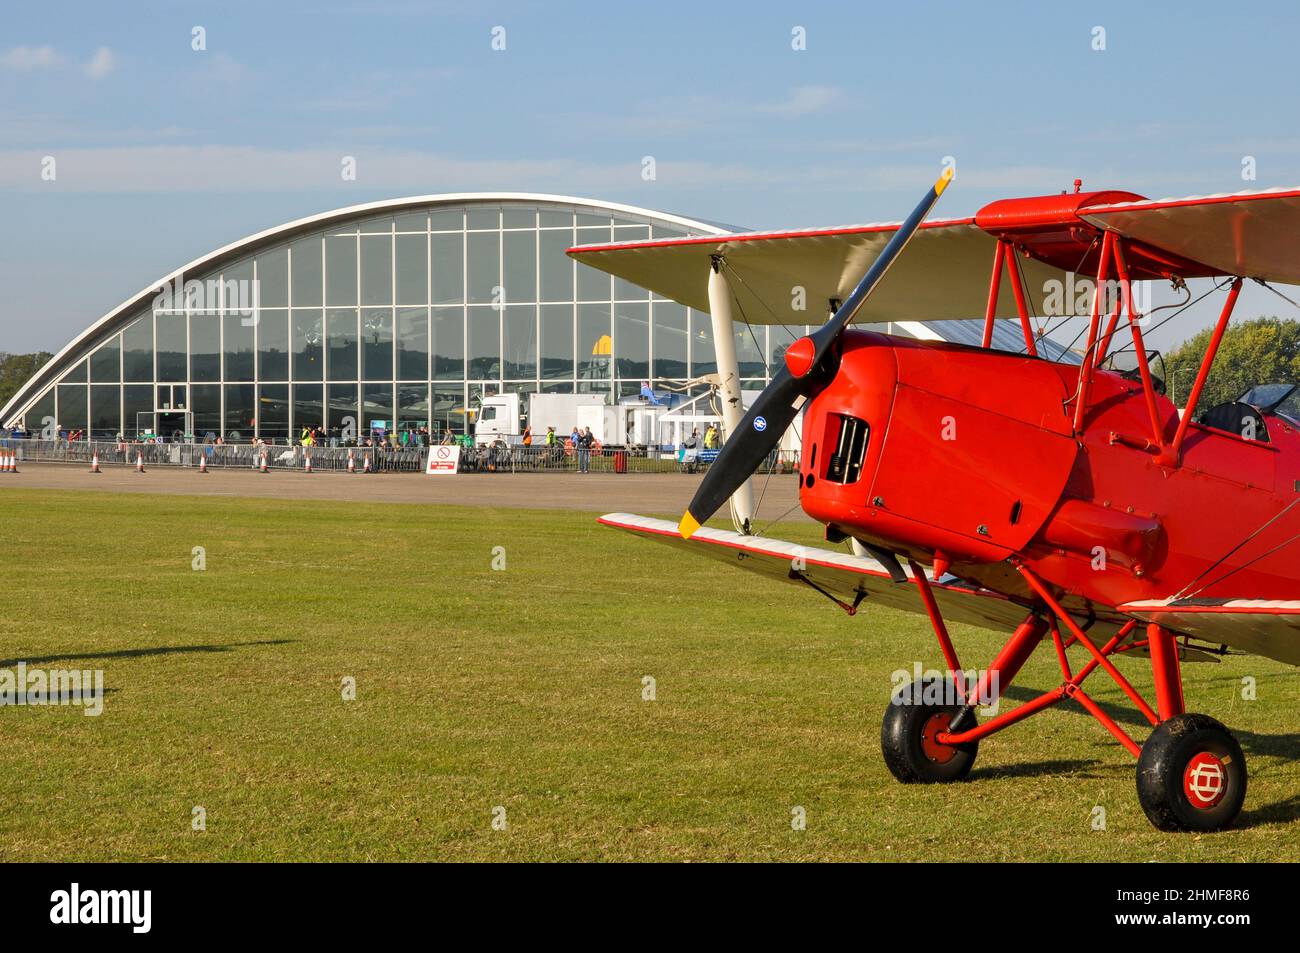 Tiger Moth biplane sitting on the grass at Duxford airfield by American Air Museum hangar. de Havilland DH82 Tiger Moth plane. Vintage aircraft Stock Photo